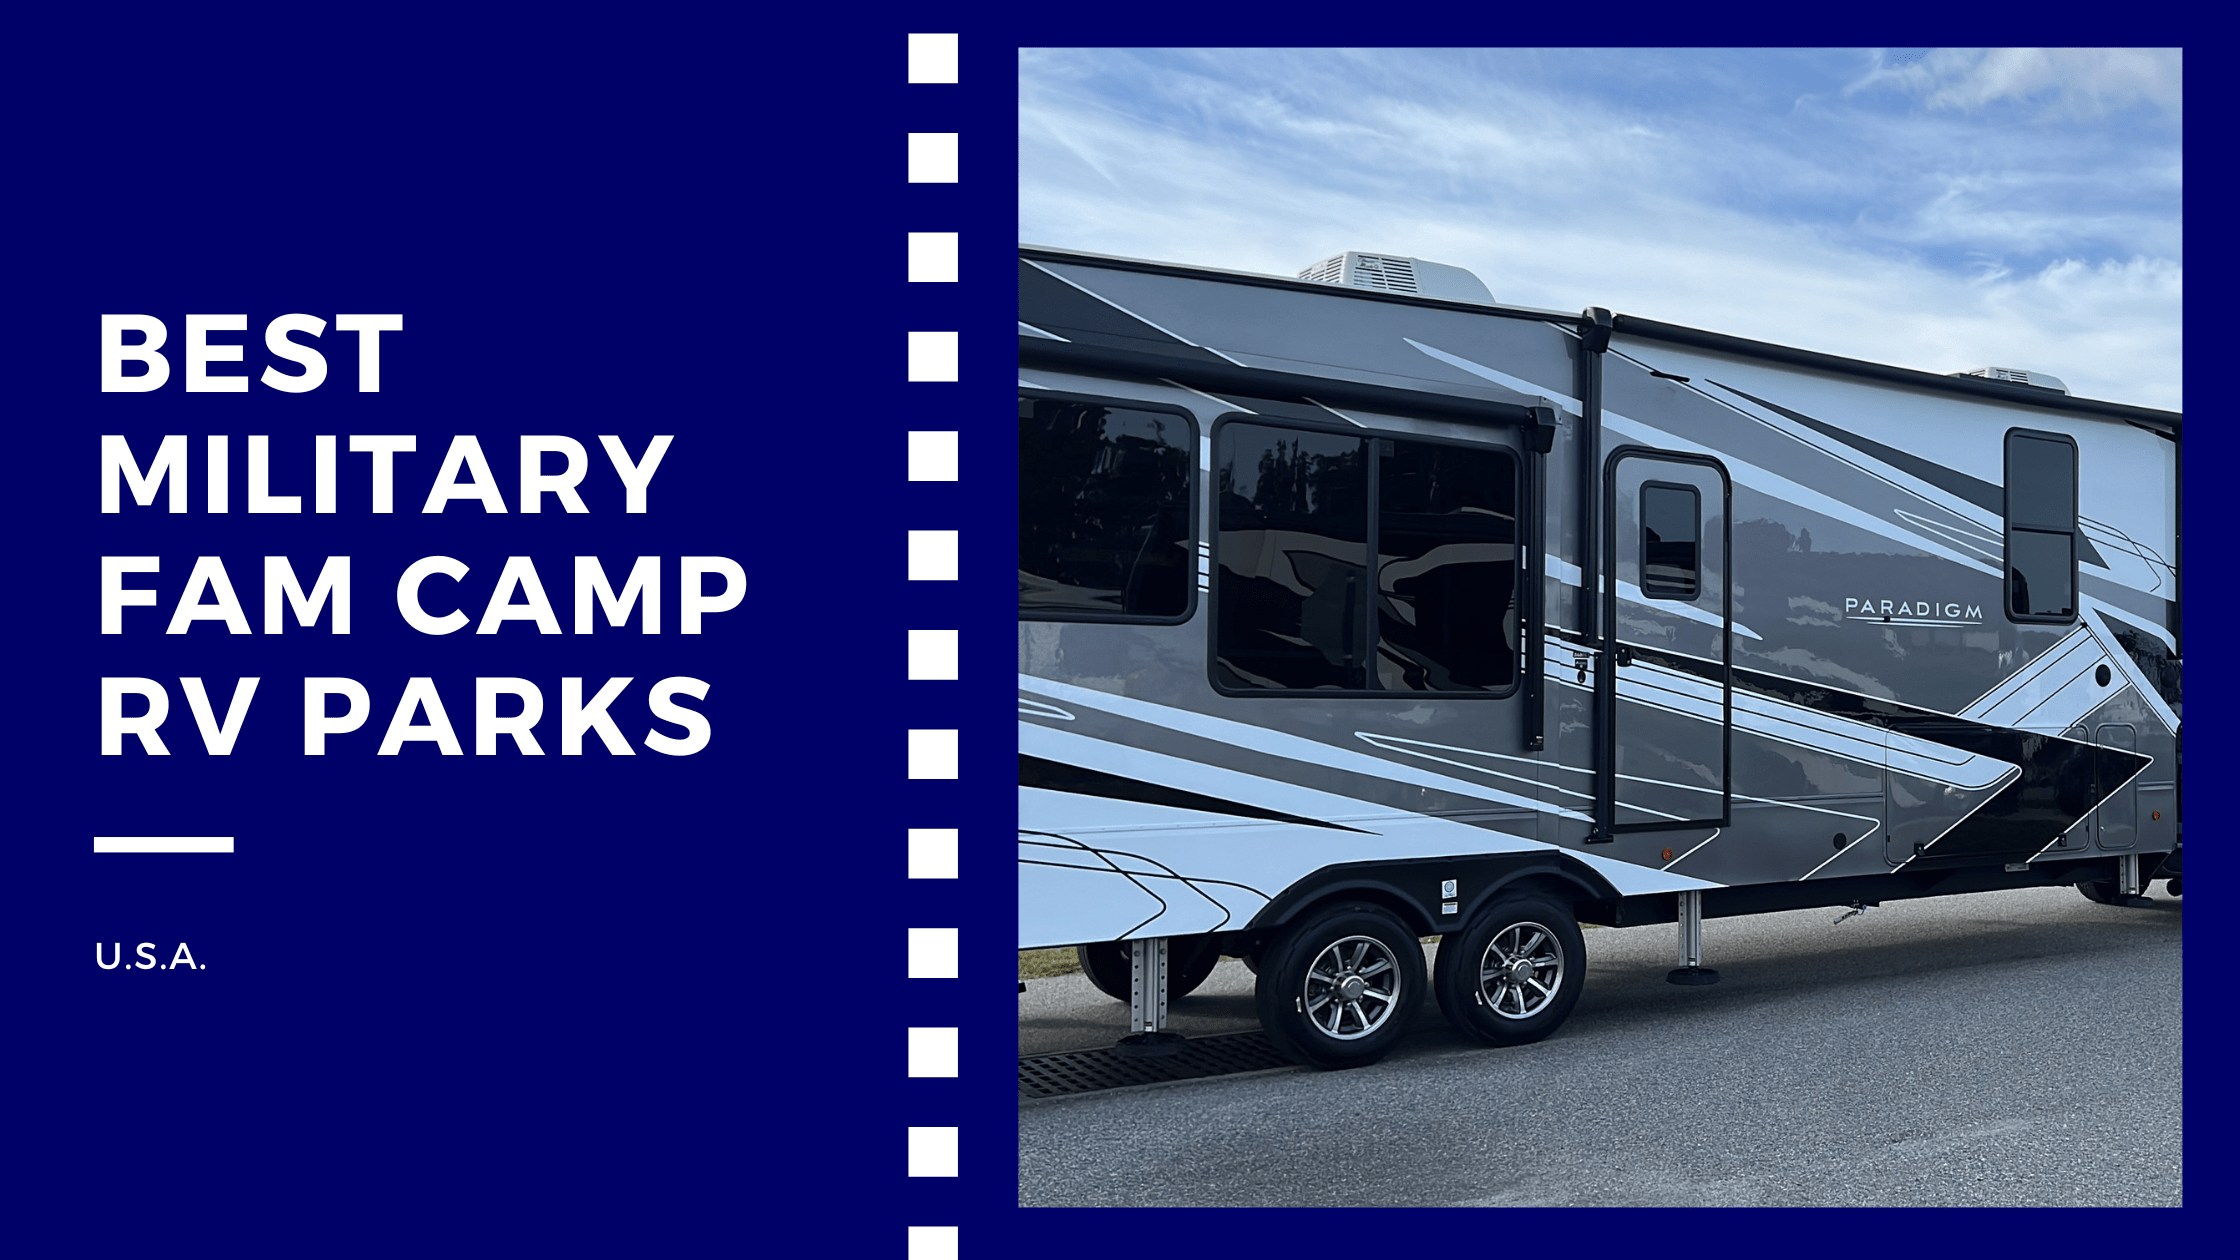 Military RV fam camps